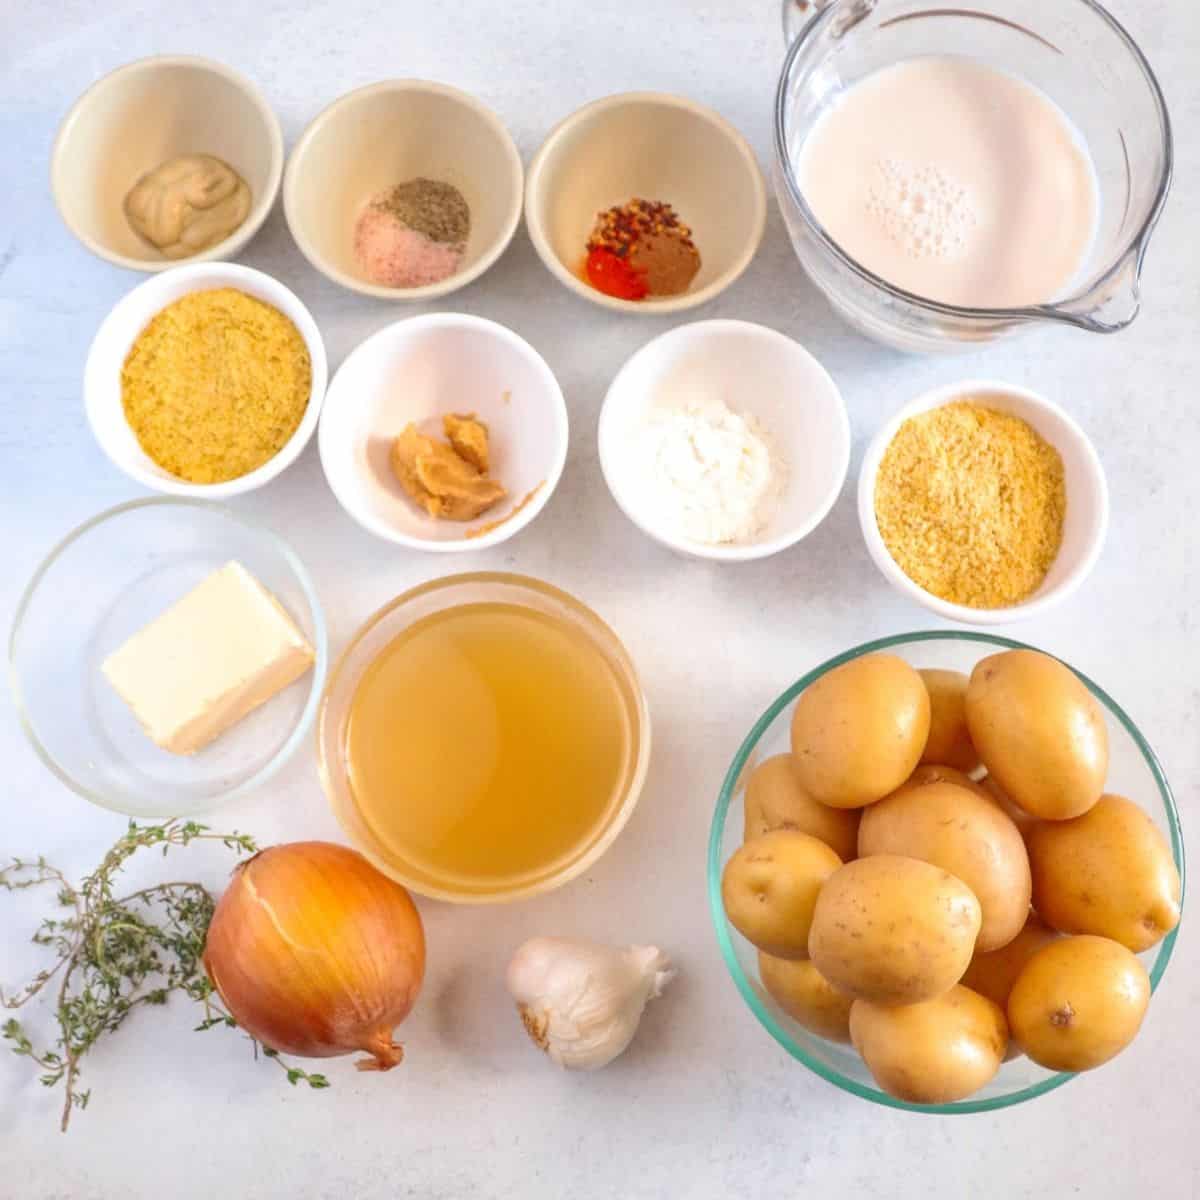 ingredients in various bowls on white surface